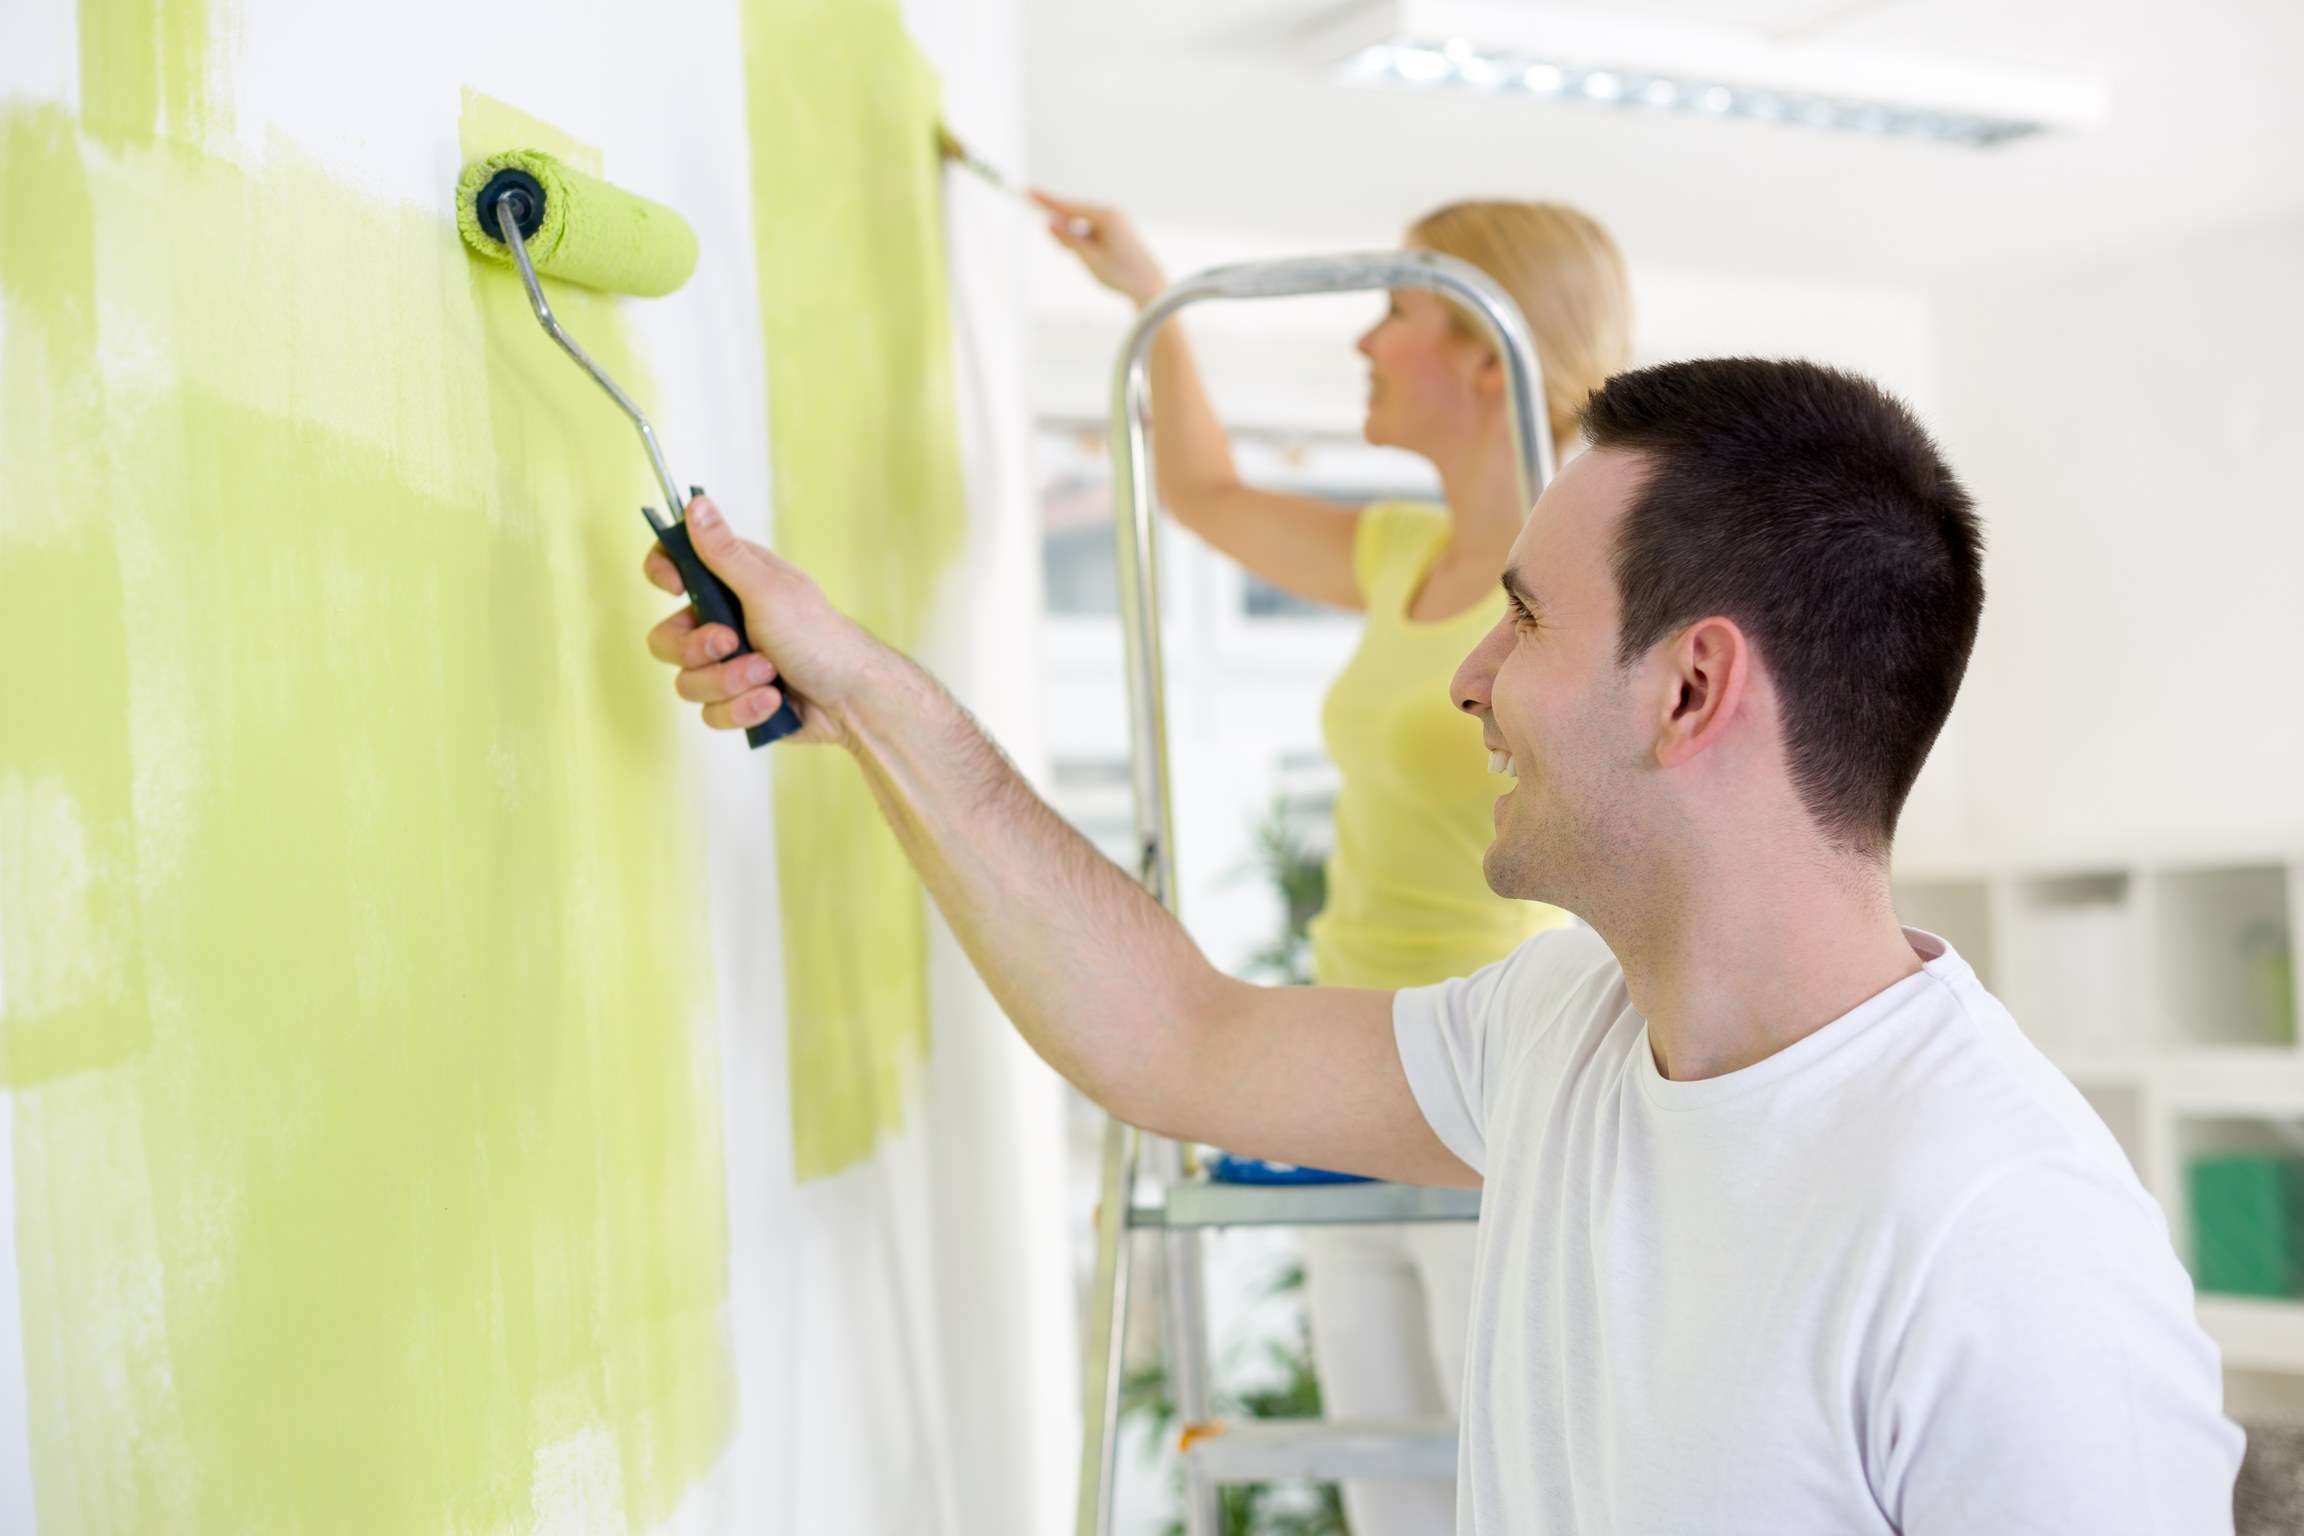 Looking for Painting Services in Dubai